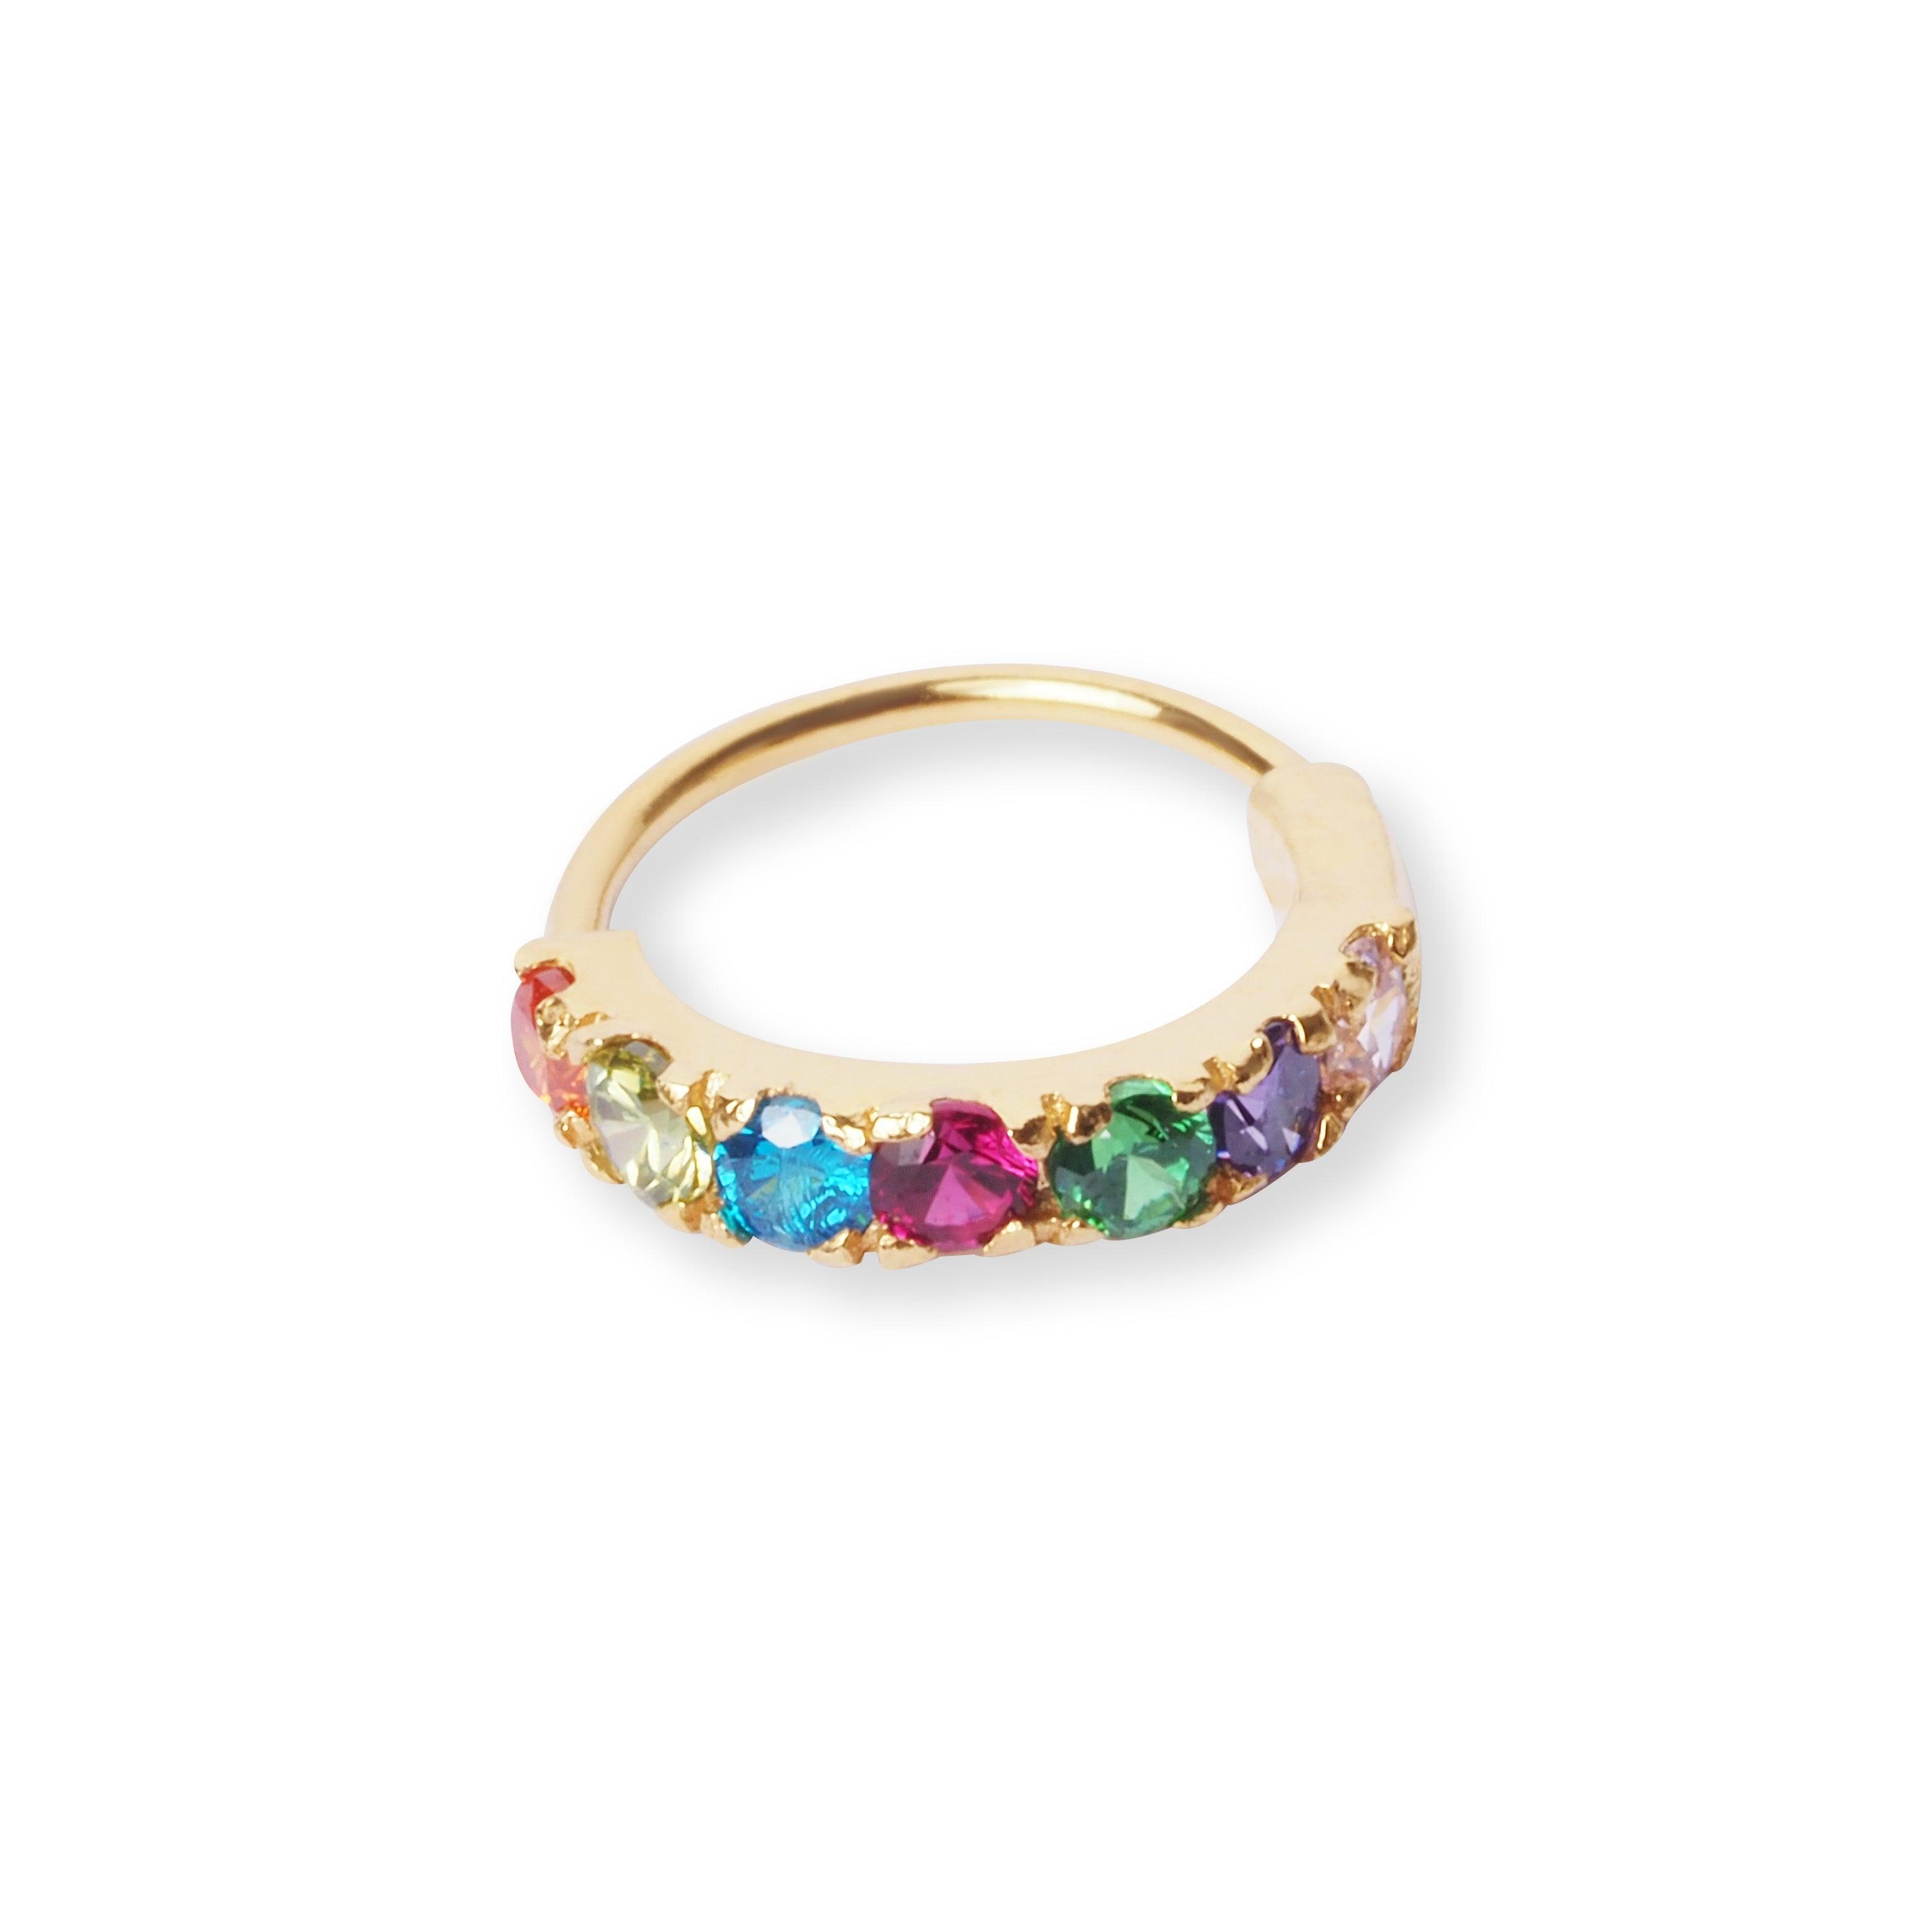 18ct Yellow Gold Nose Ring with Multi-Coloured Cubic Zirconias NR-7587 - Minar Jewellers